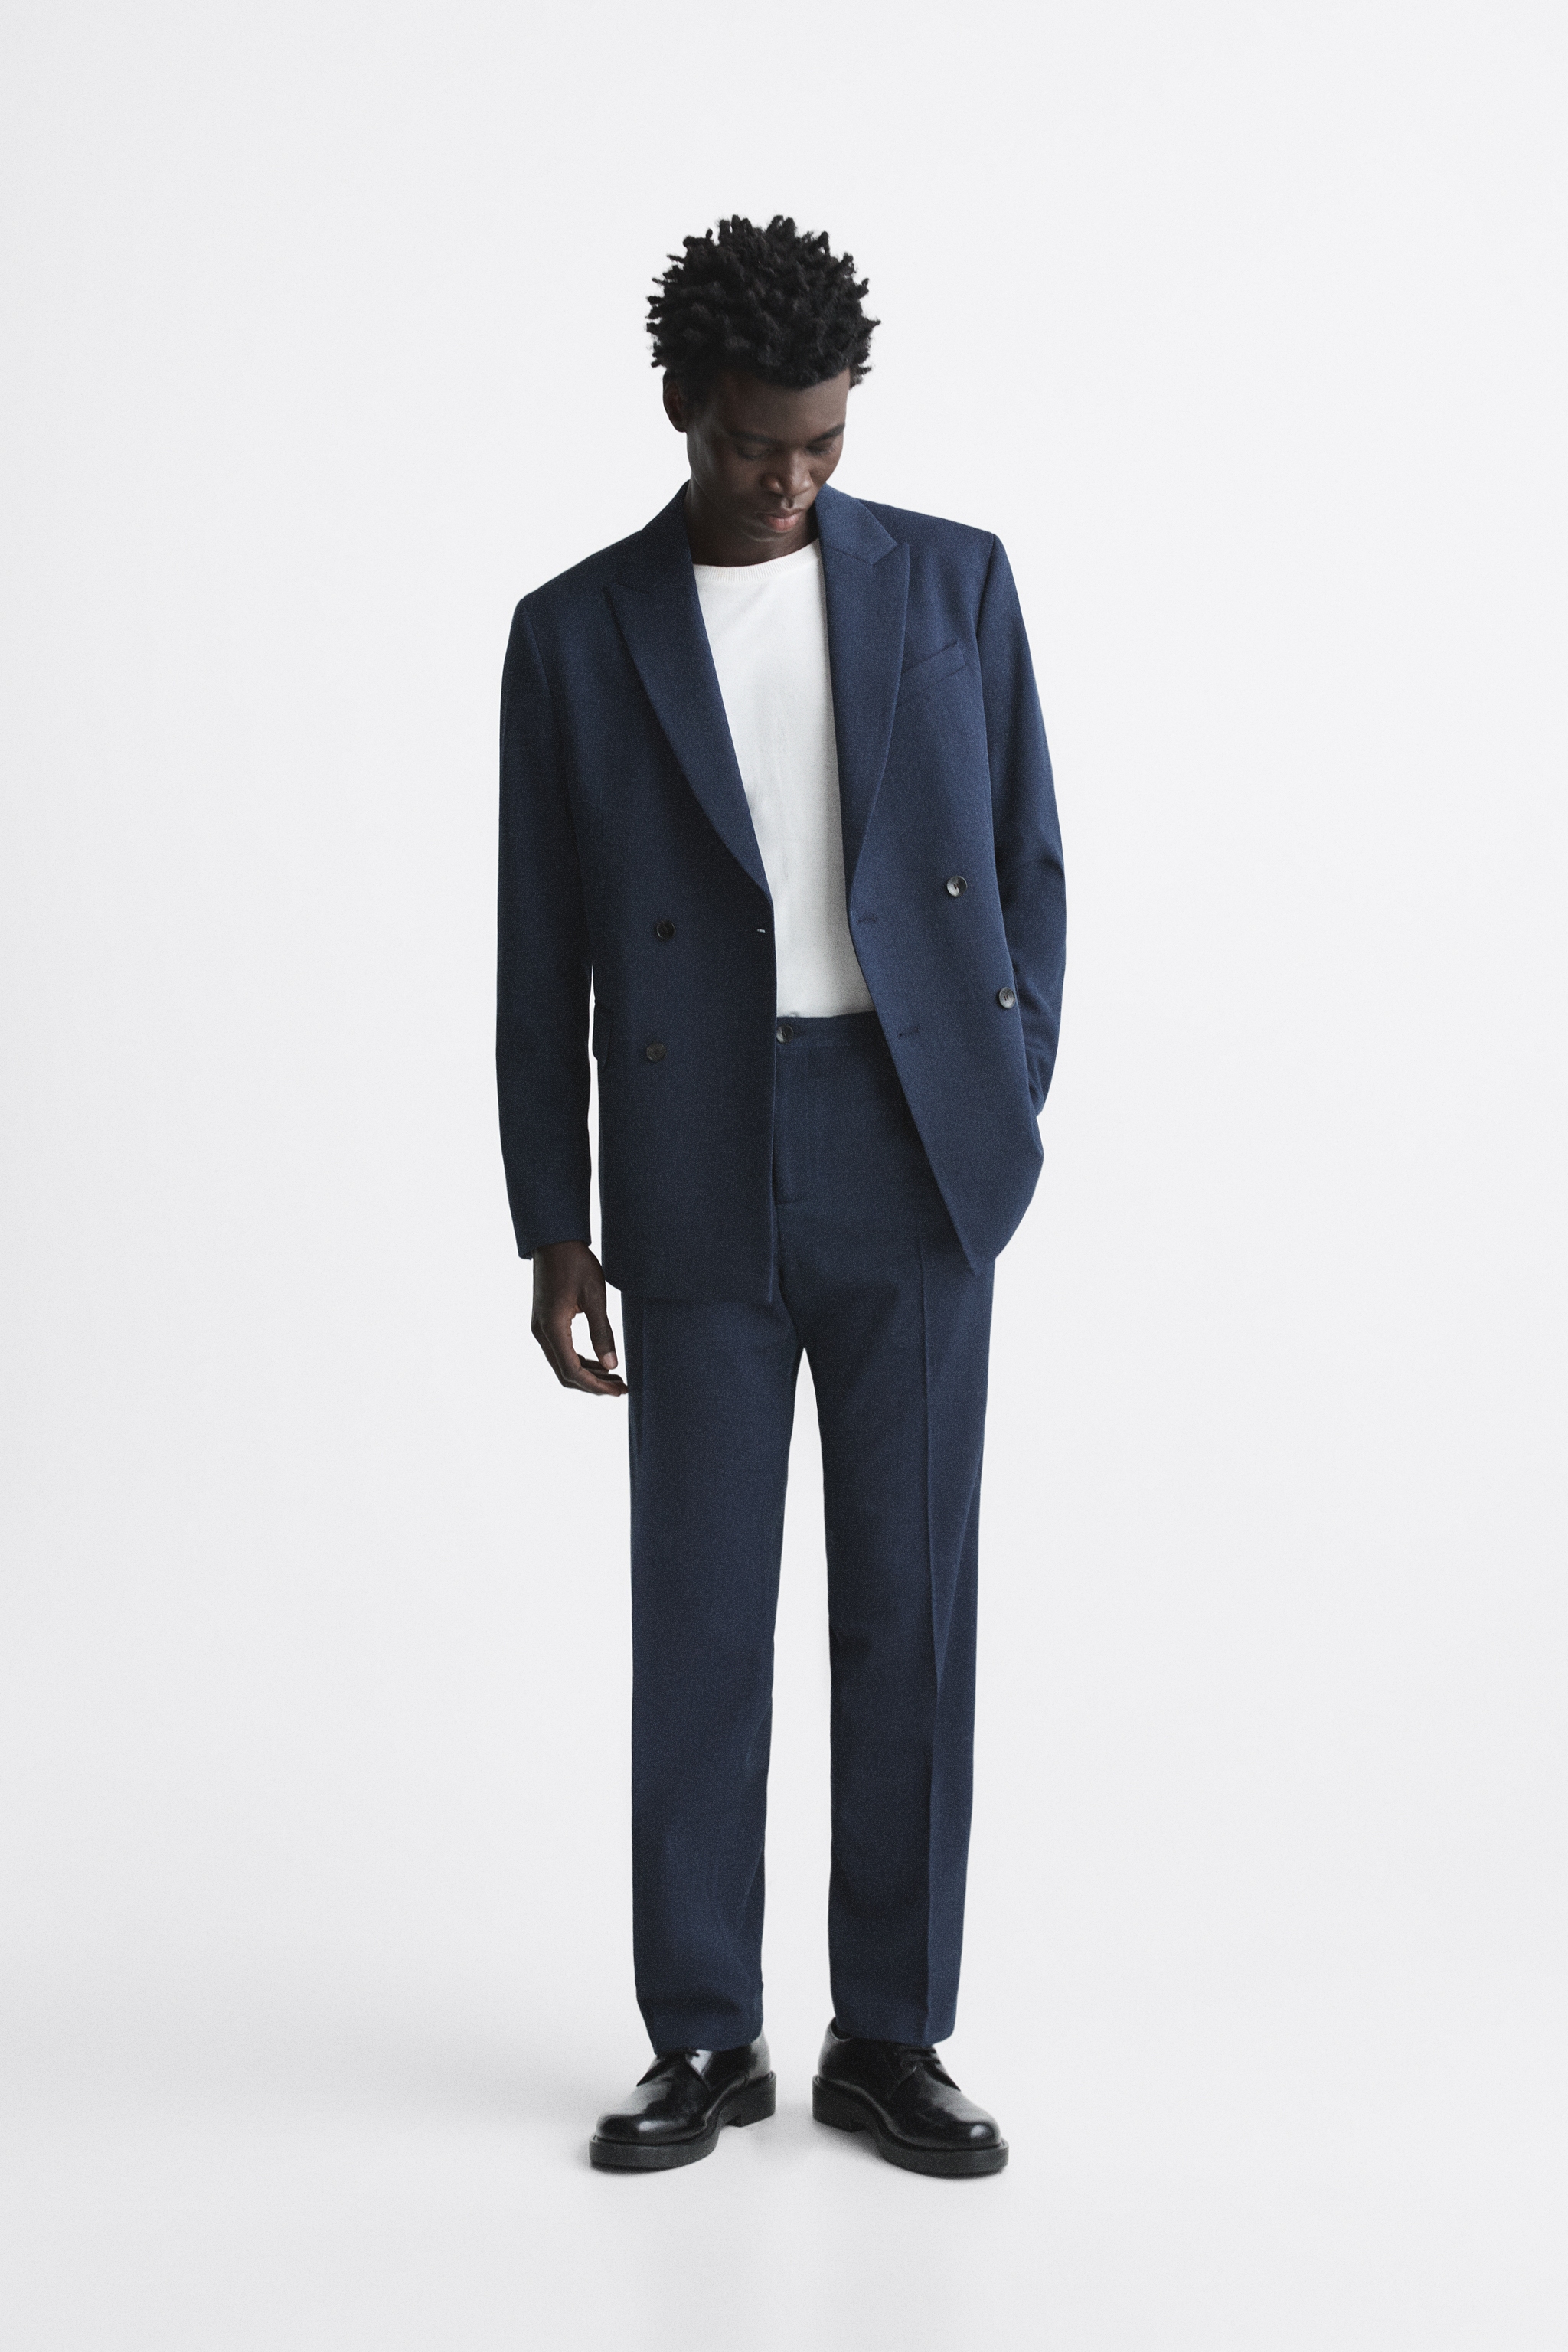 Zara DOUBLE BREASTED SUIT JACKET